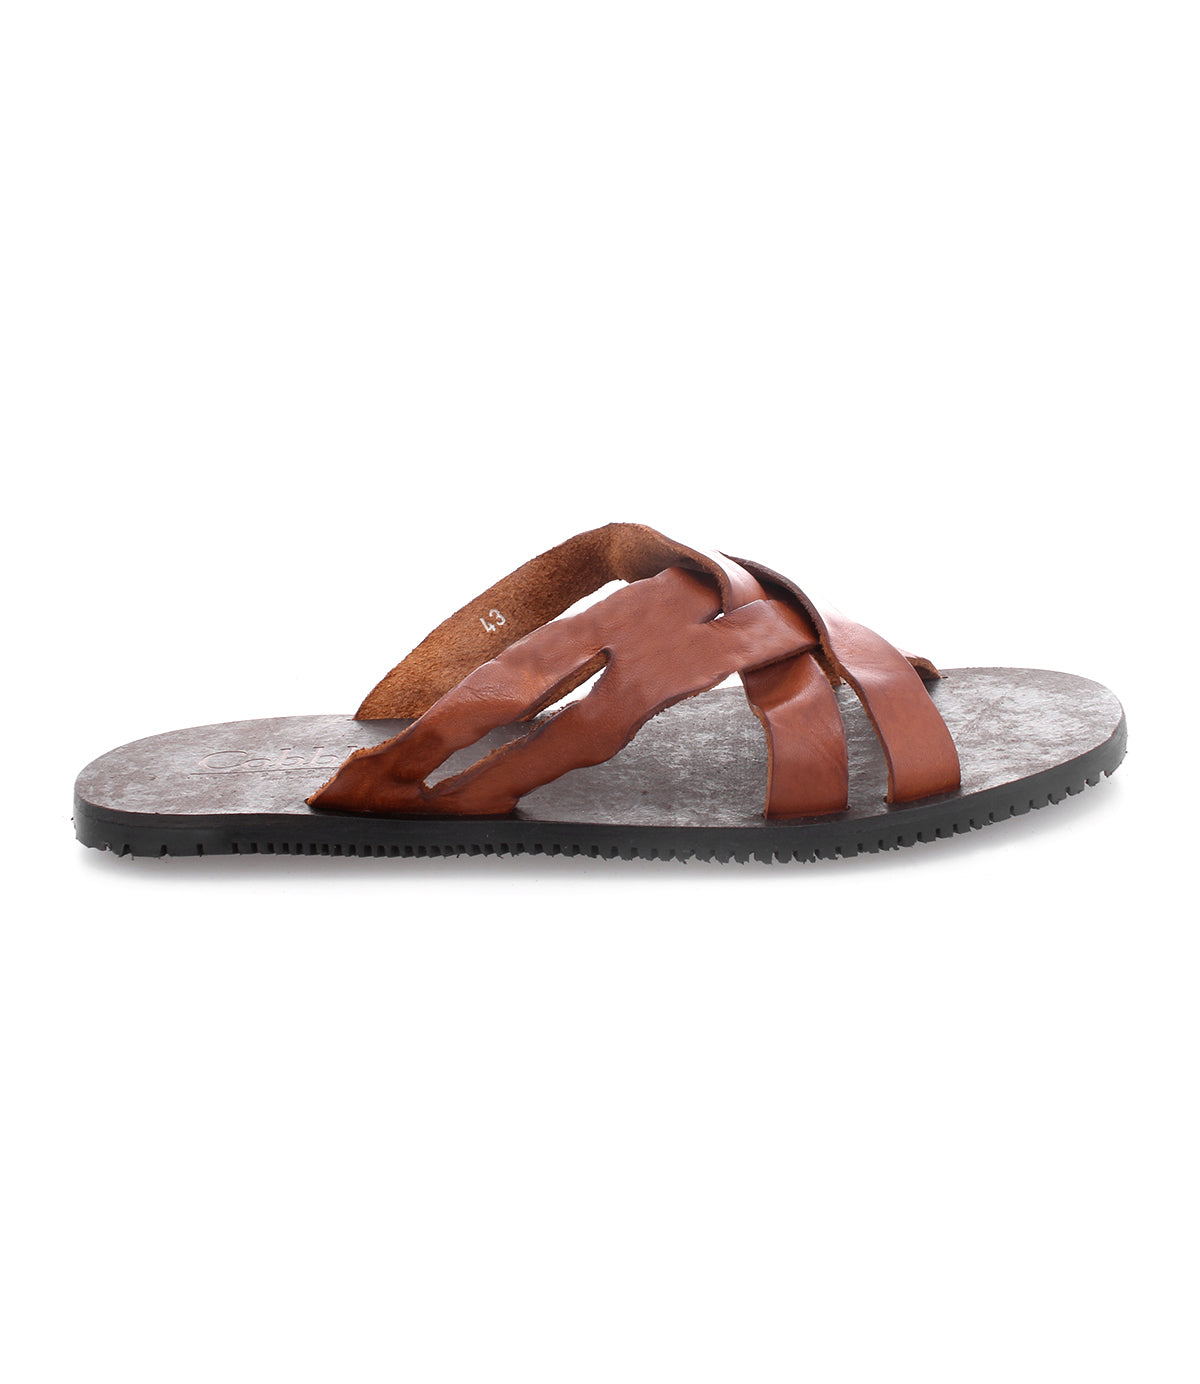 A pair of Impromptu sandals from Bed Stu, made of brown leather with woven leather straps, offering both casual style and comfort.